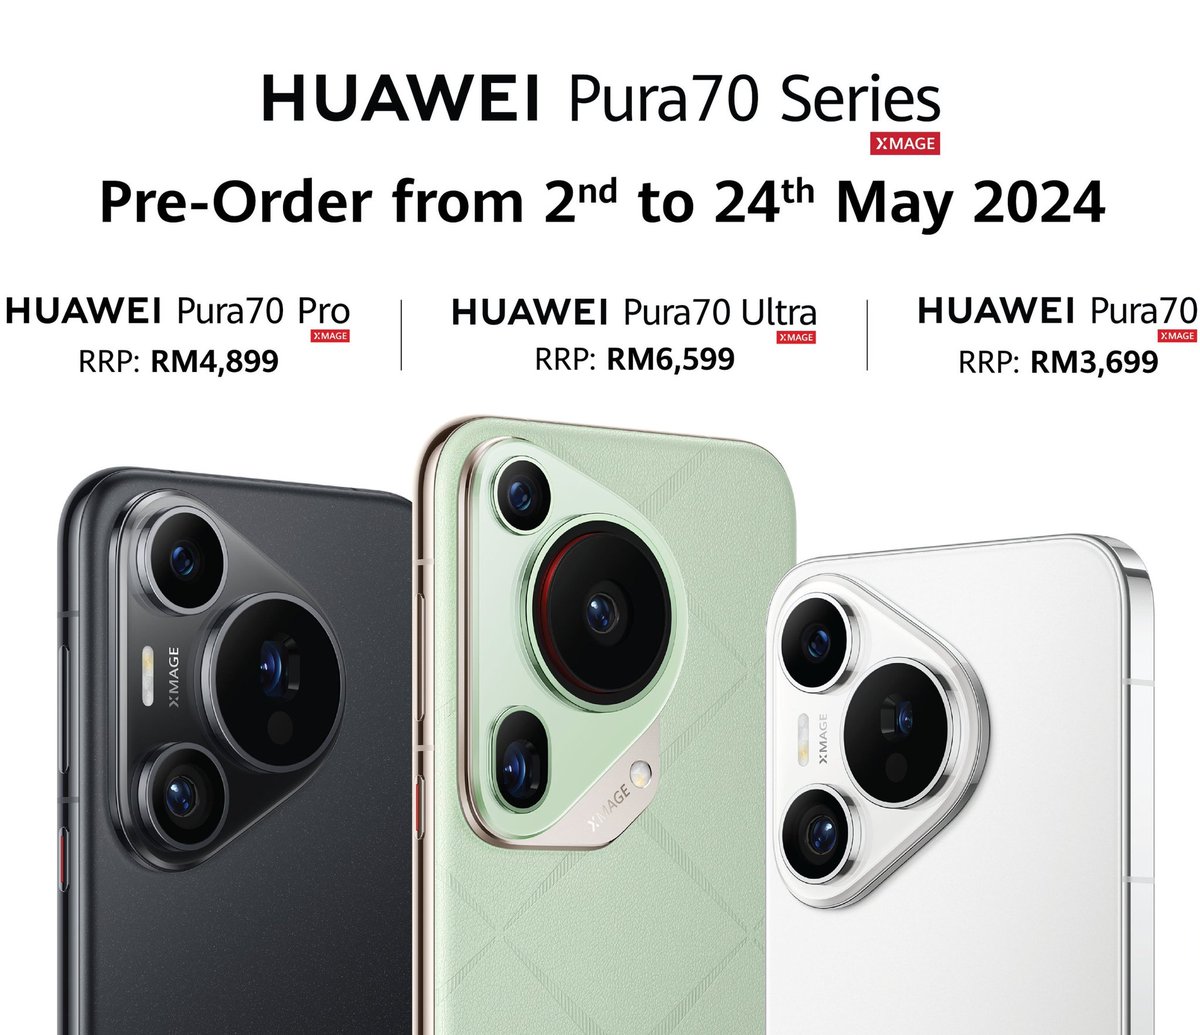 Huawei Pura 70 series smartphones including the Pura 70, Pura 70 Pro, and Pura 70 Ultra, have arrived in the European market with a starting price of €999.
#Huawei #HuaweiPura70series #Huaweipura70 #Huaweipura70pro #Huaweipura70ultra #TechNews #TrendingNews